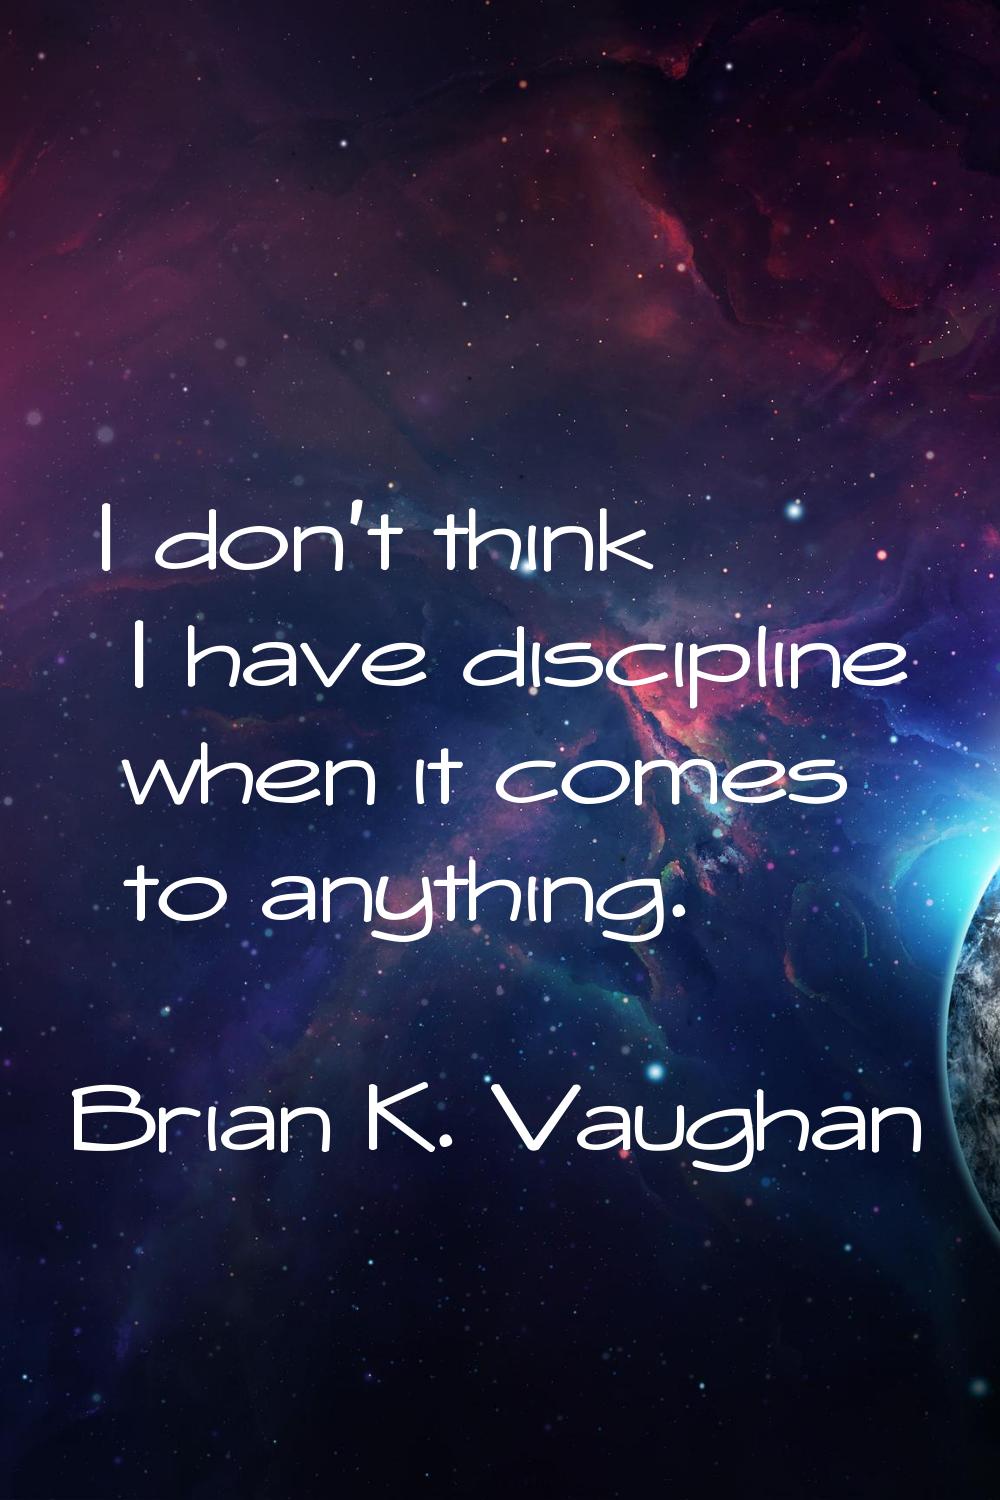 I don't think I have discipline when it comes to anything.